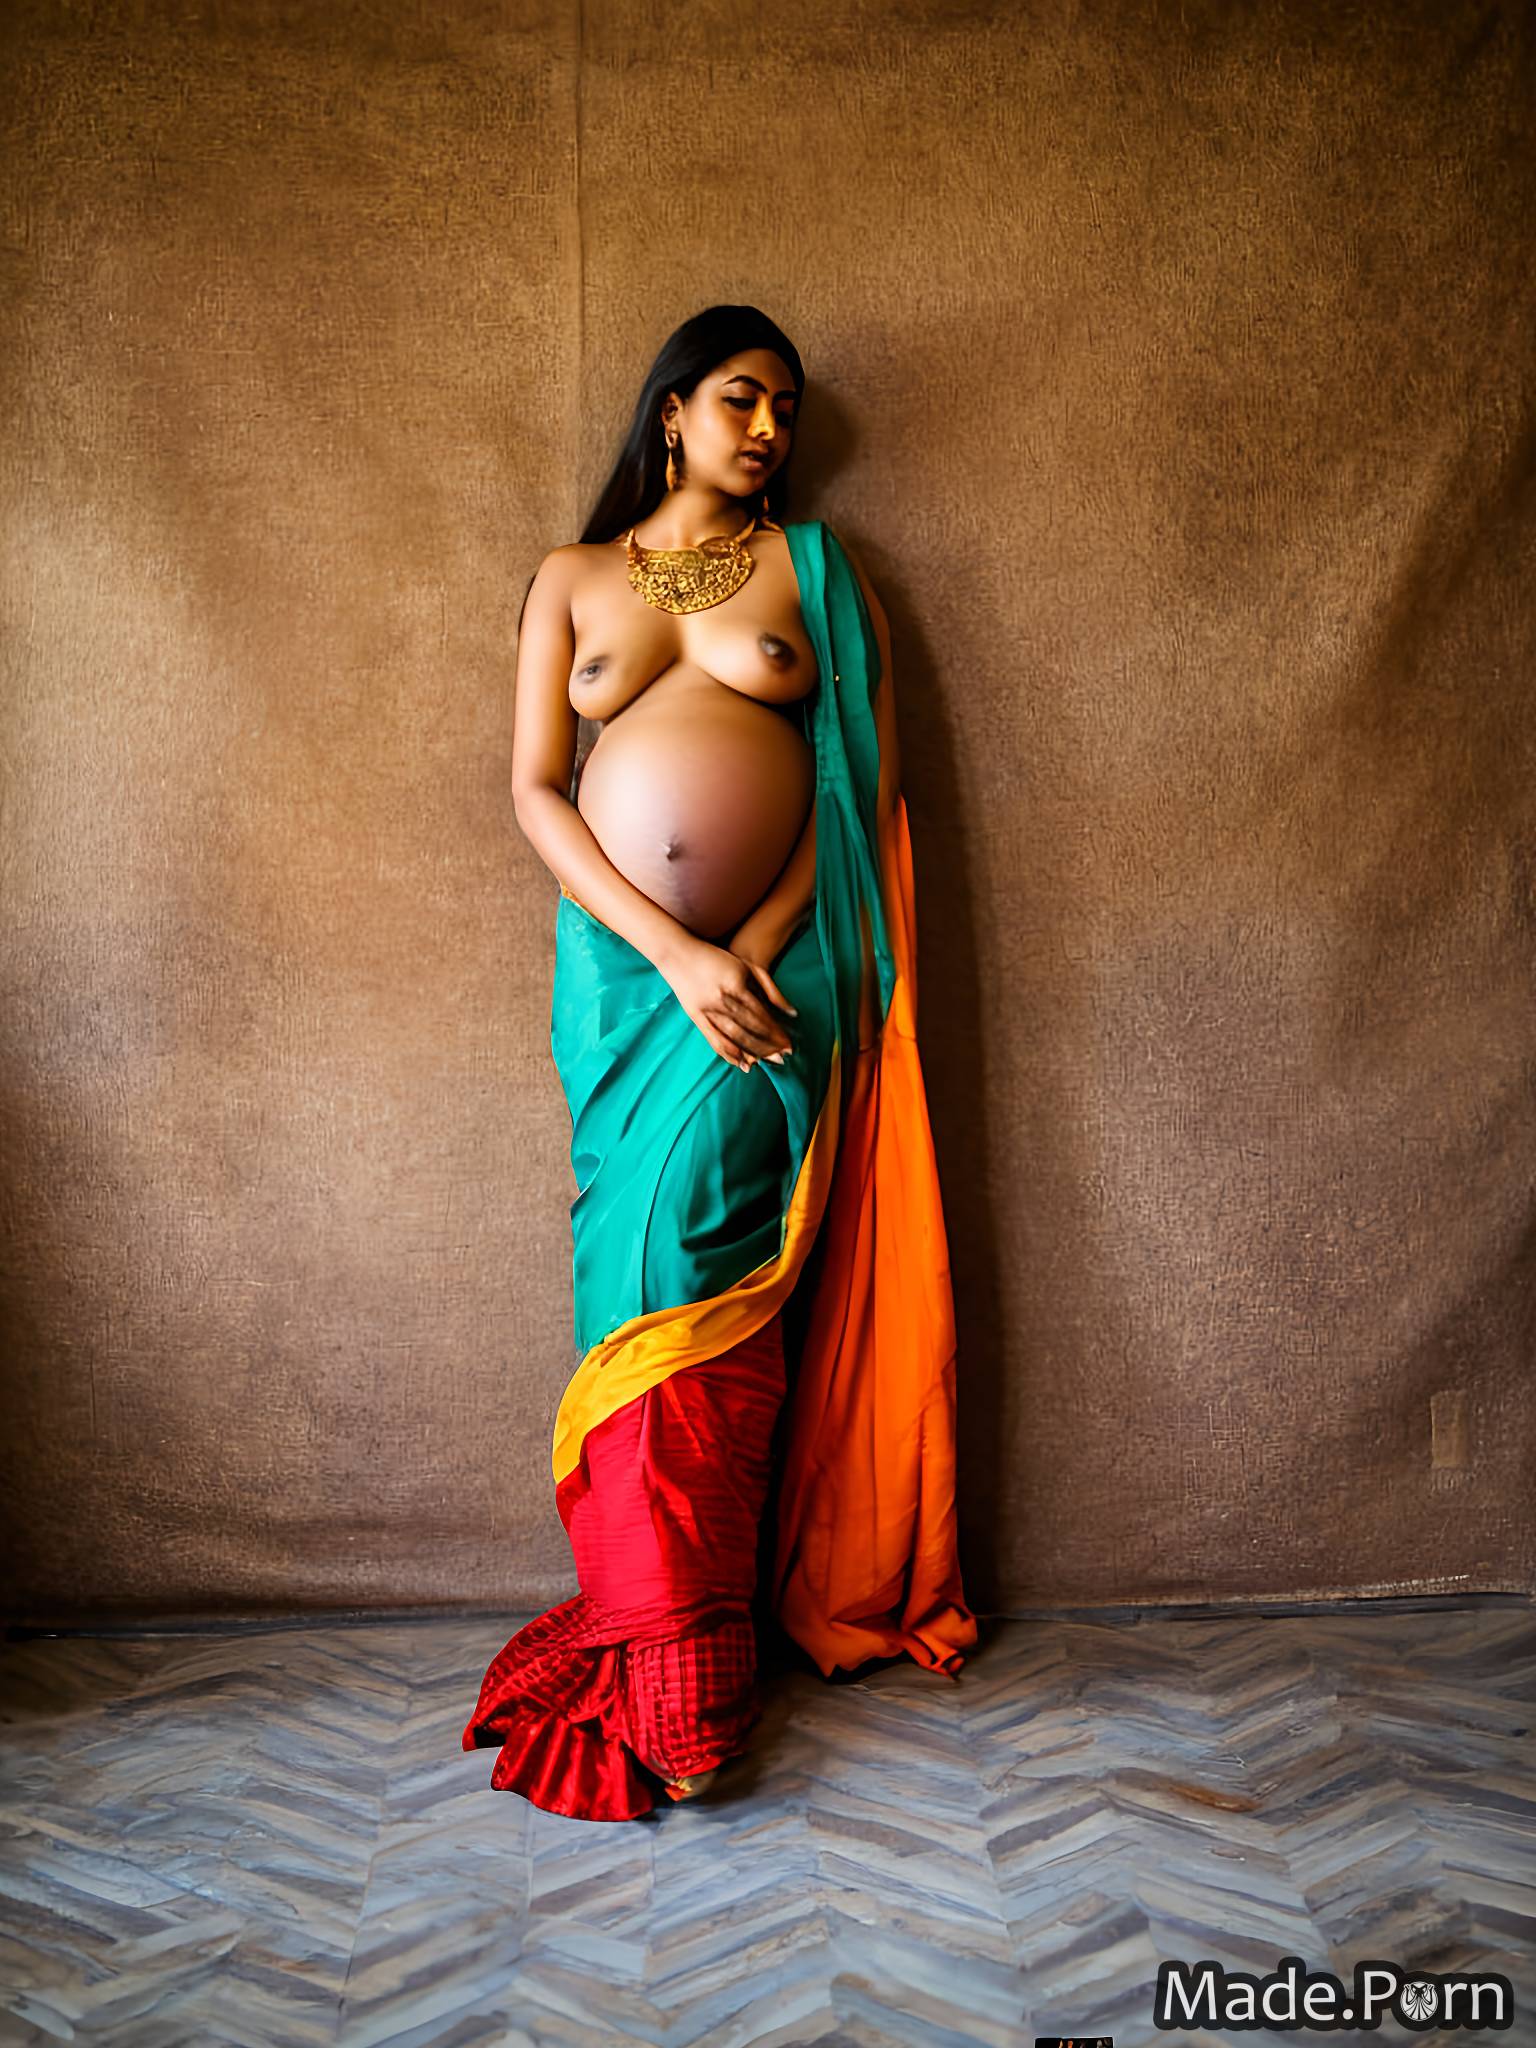 Naked Indian Pregnant - Porn image of pregnant 20 nude sari seductive indian photo created by AI